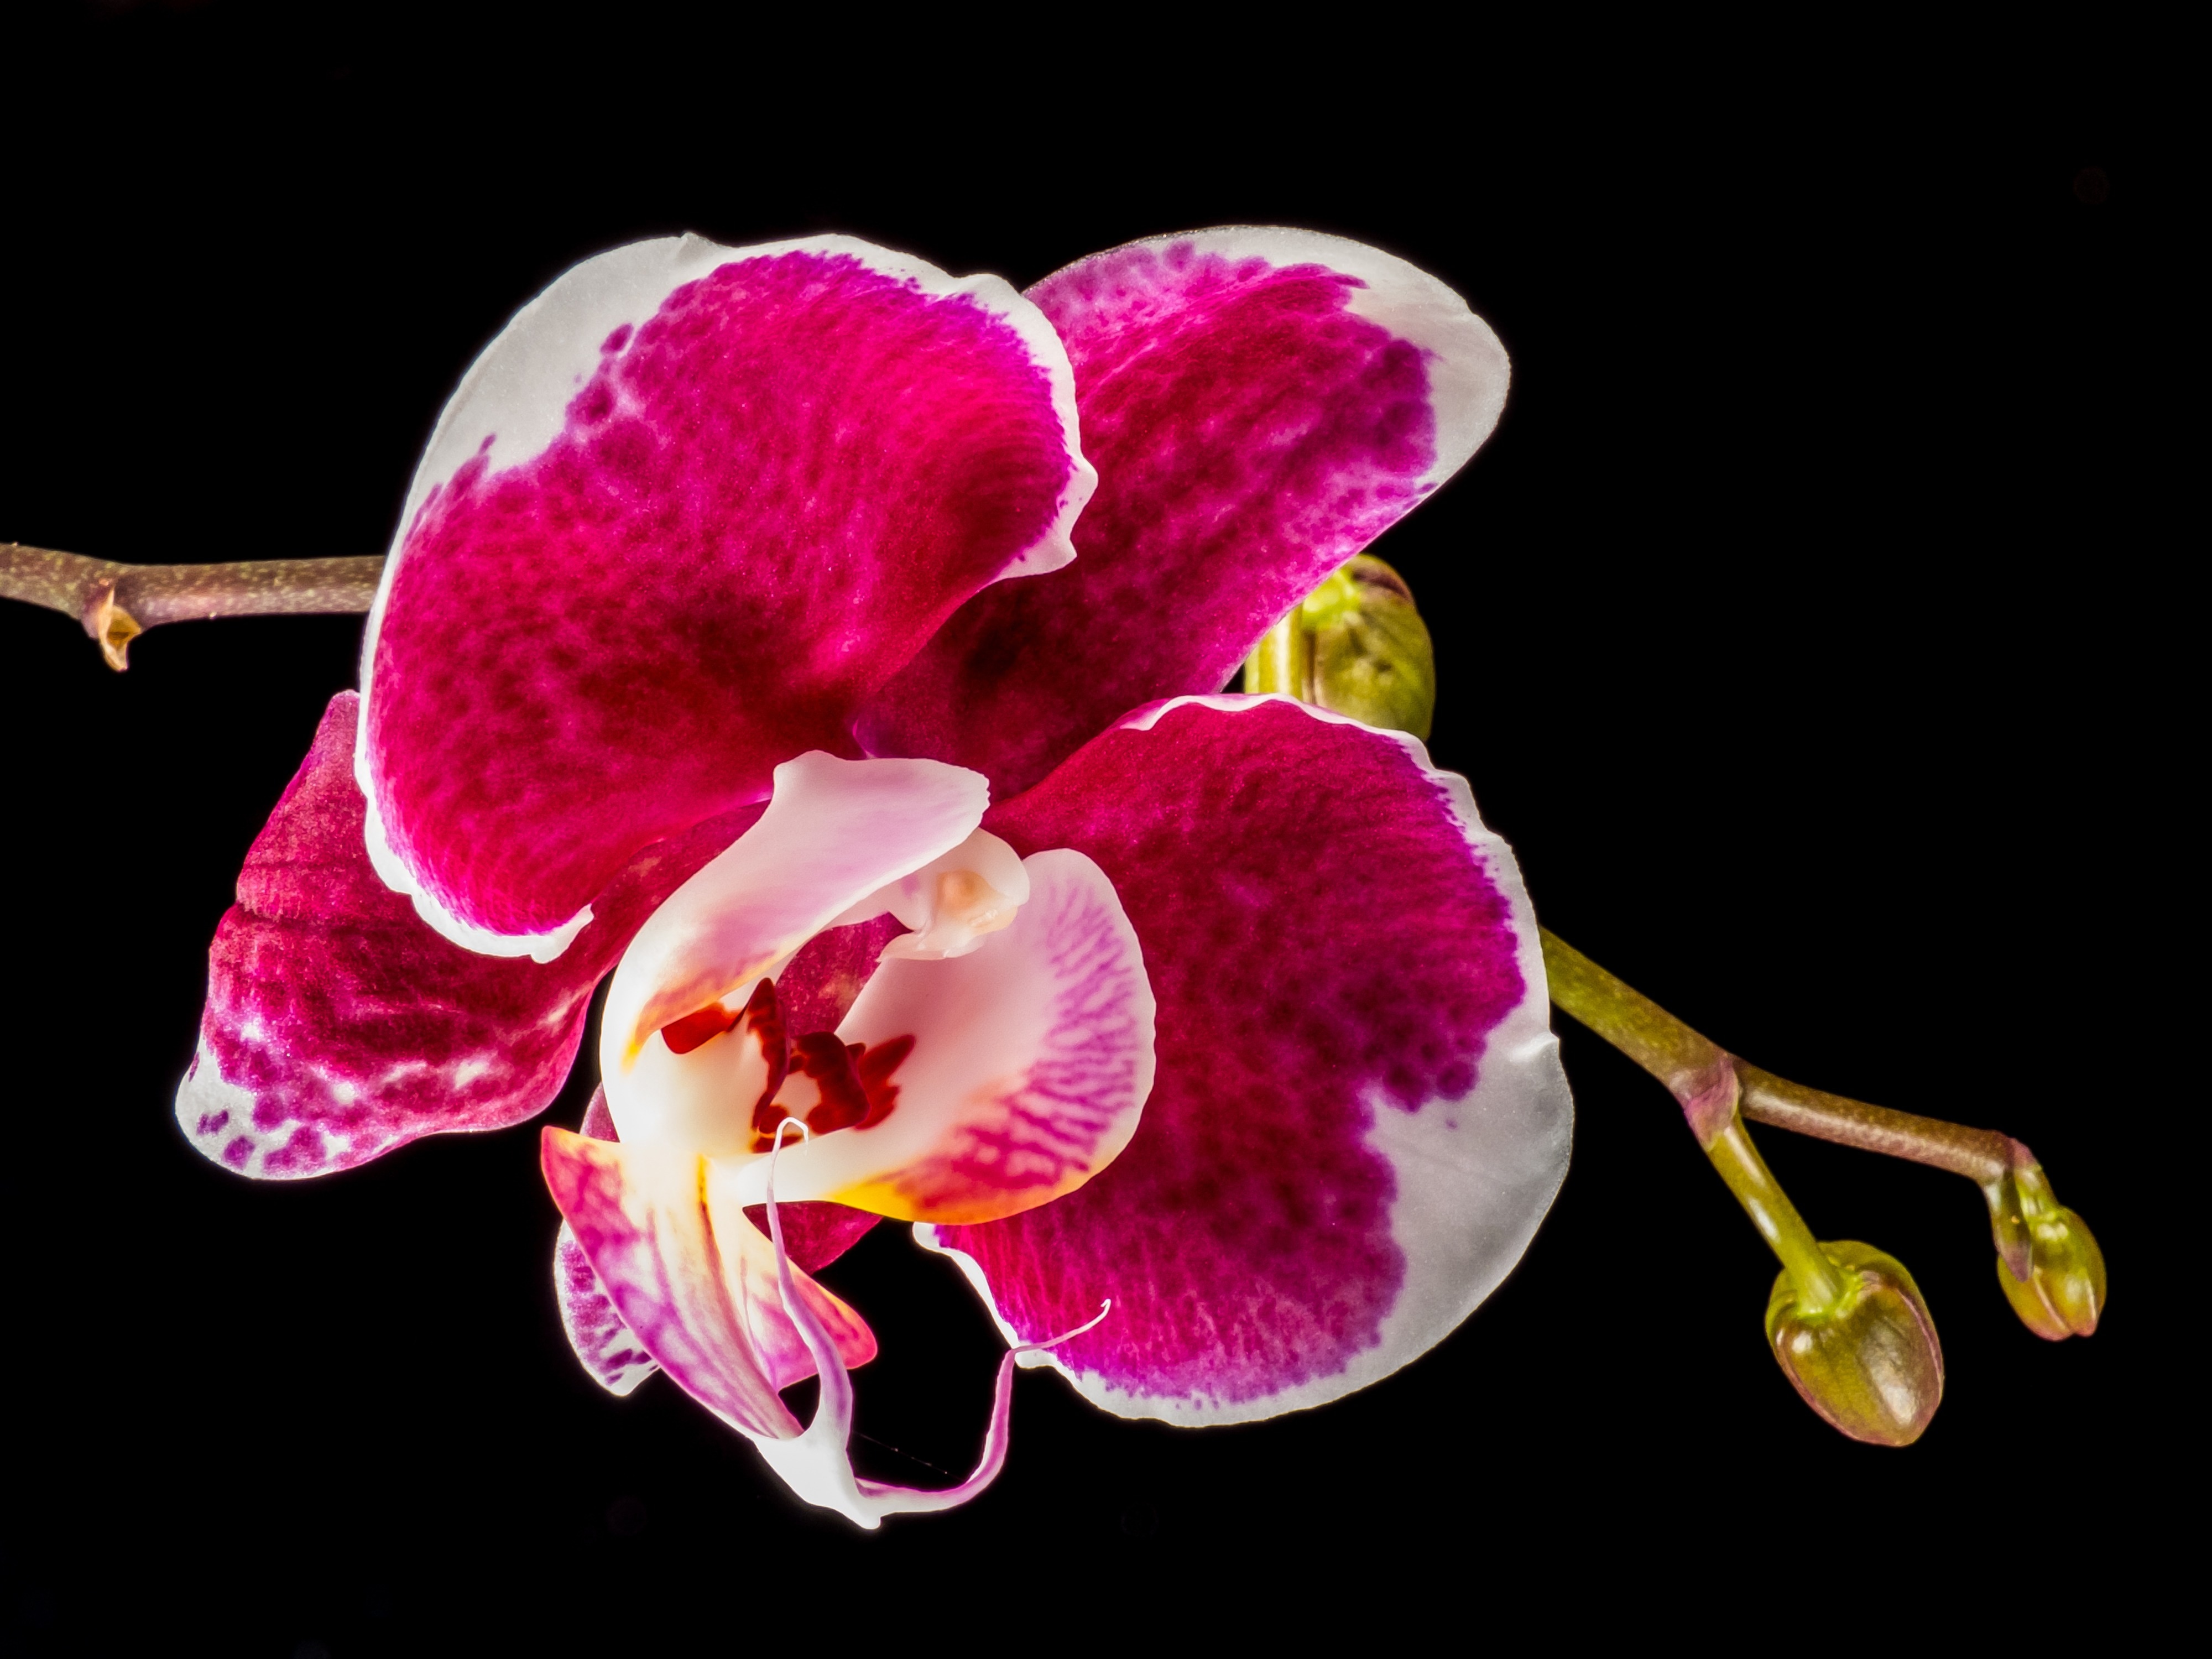 1920x1080 wallpaper | pink orchid plant | Peakpx